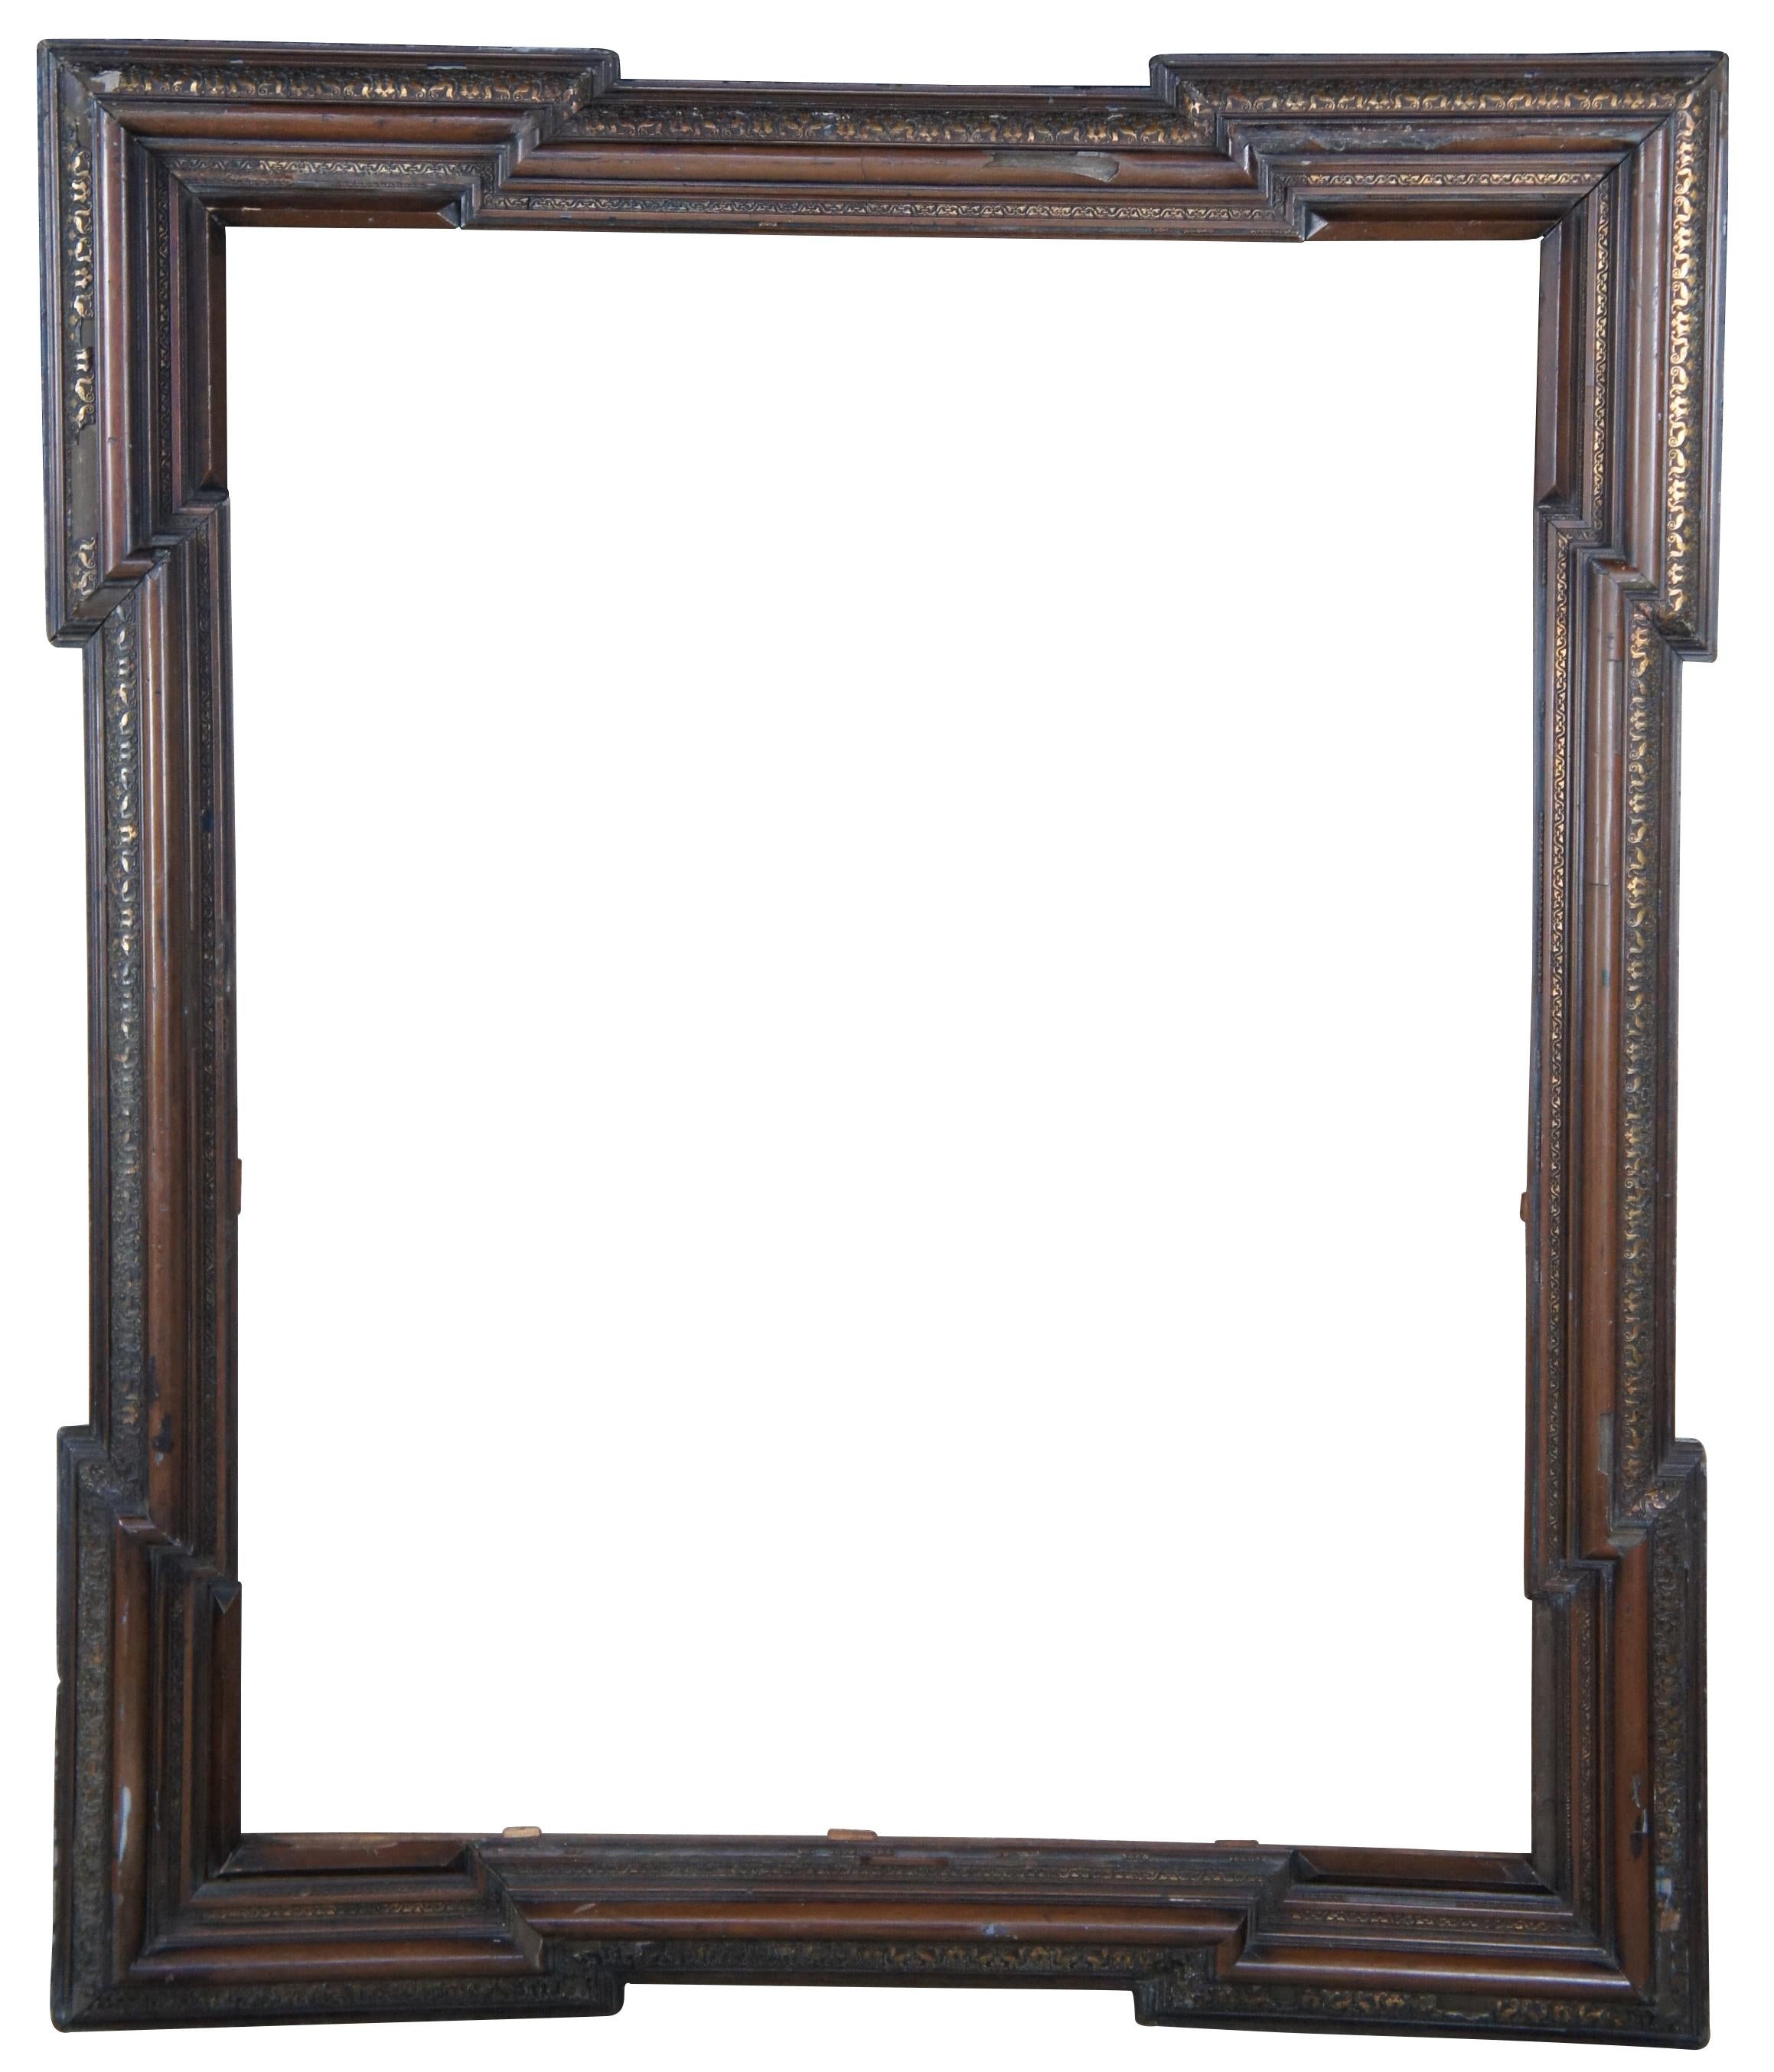 Monumental antique Dutch Baroque frame. Great for use as a mirror or art frame. Made of walnut featuring geometric form with extended corners and ornate carved gilded accents over a layered frame. Measure: 61